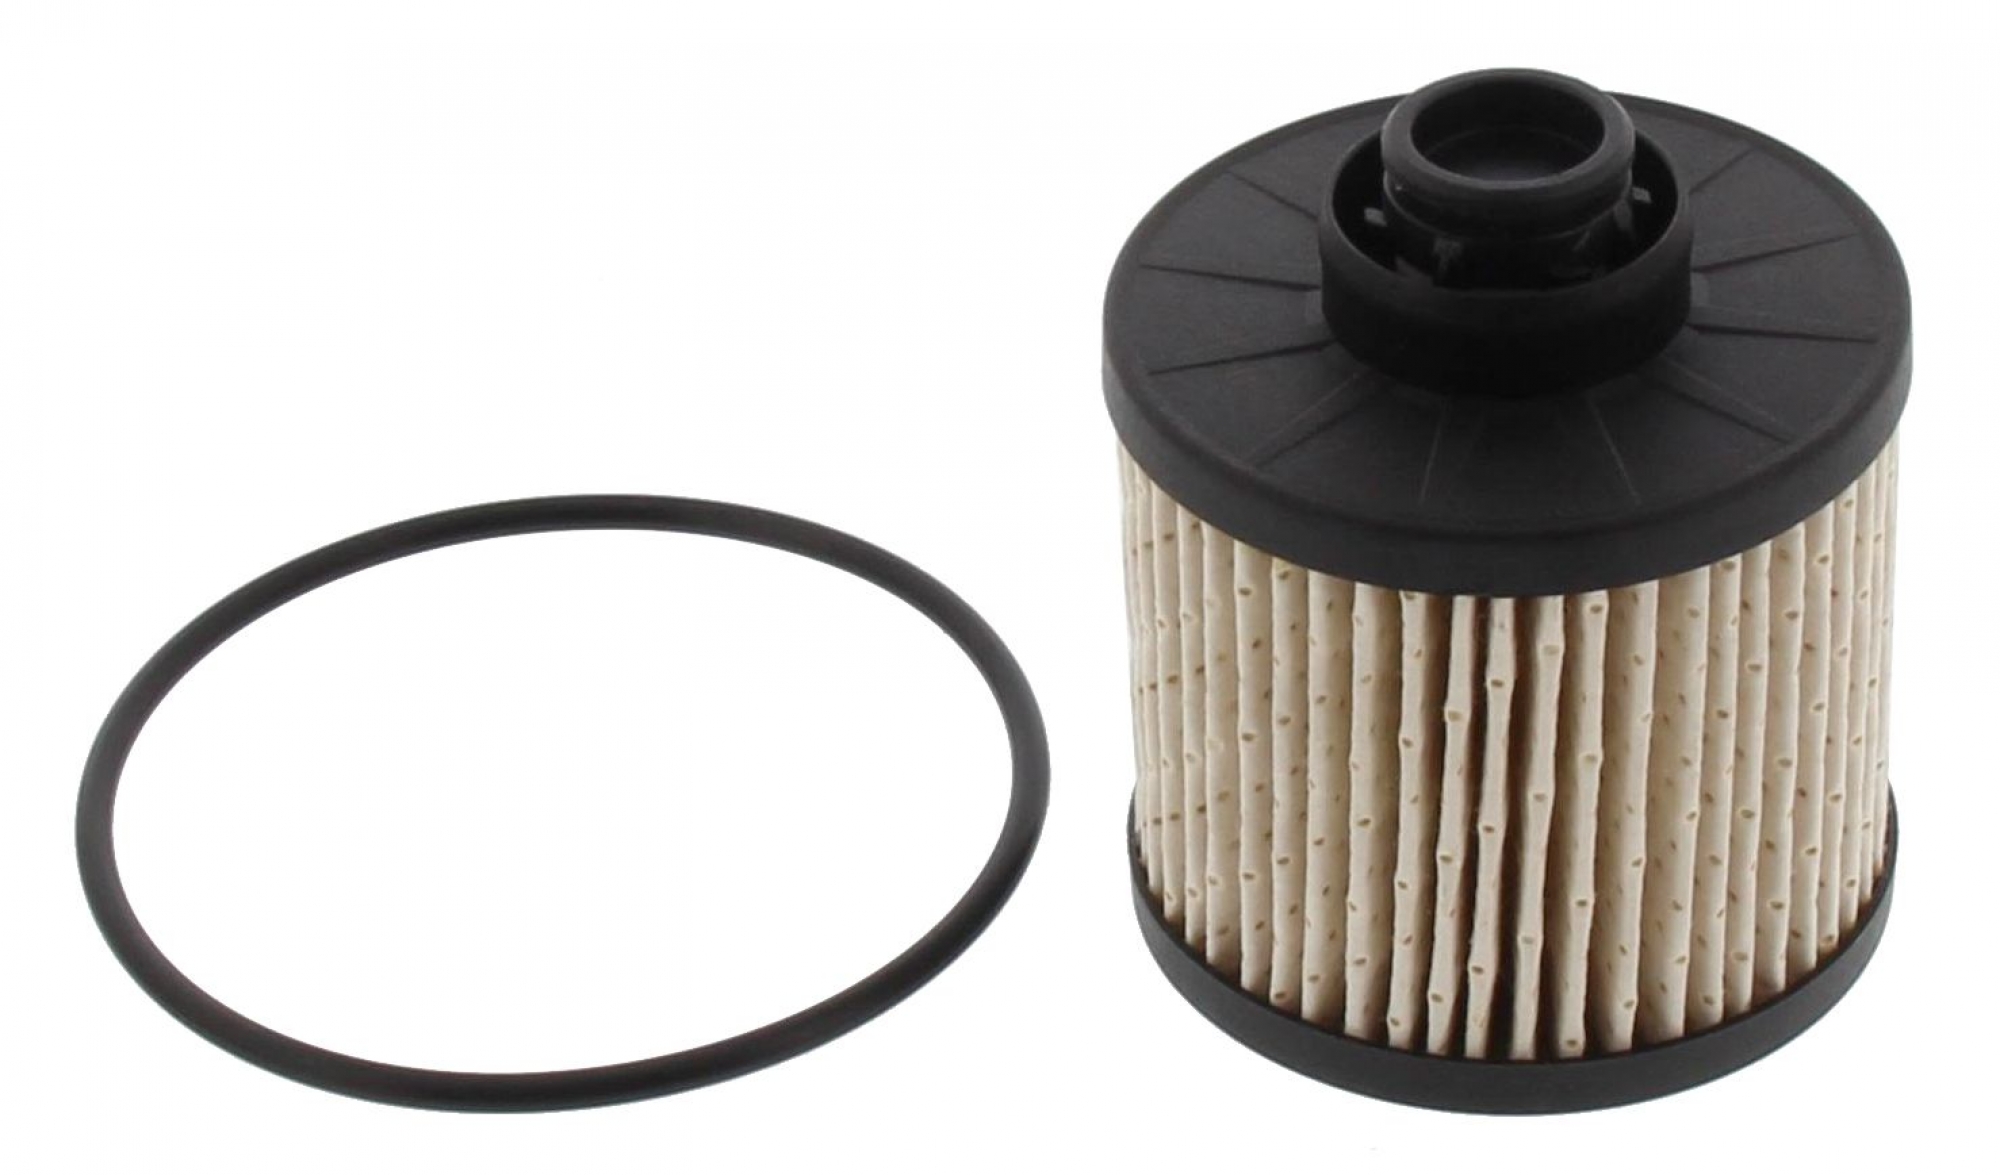 Kraftstofffilter, CITROËN, DS, FORD, FORD USA, OPEL, PEUGEOT, TOYOTA, VAUXHALL